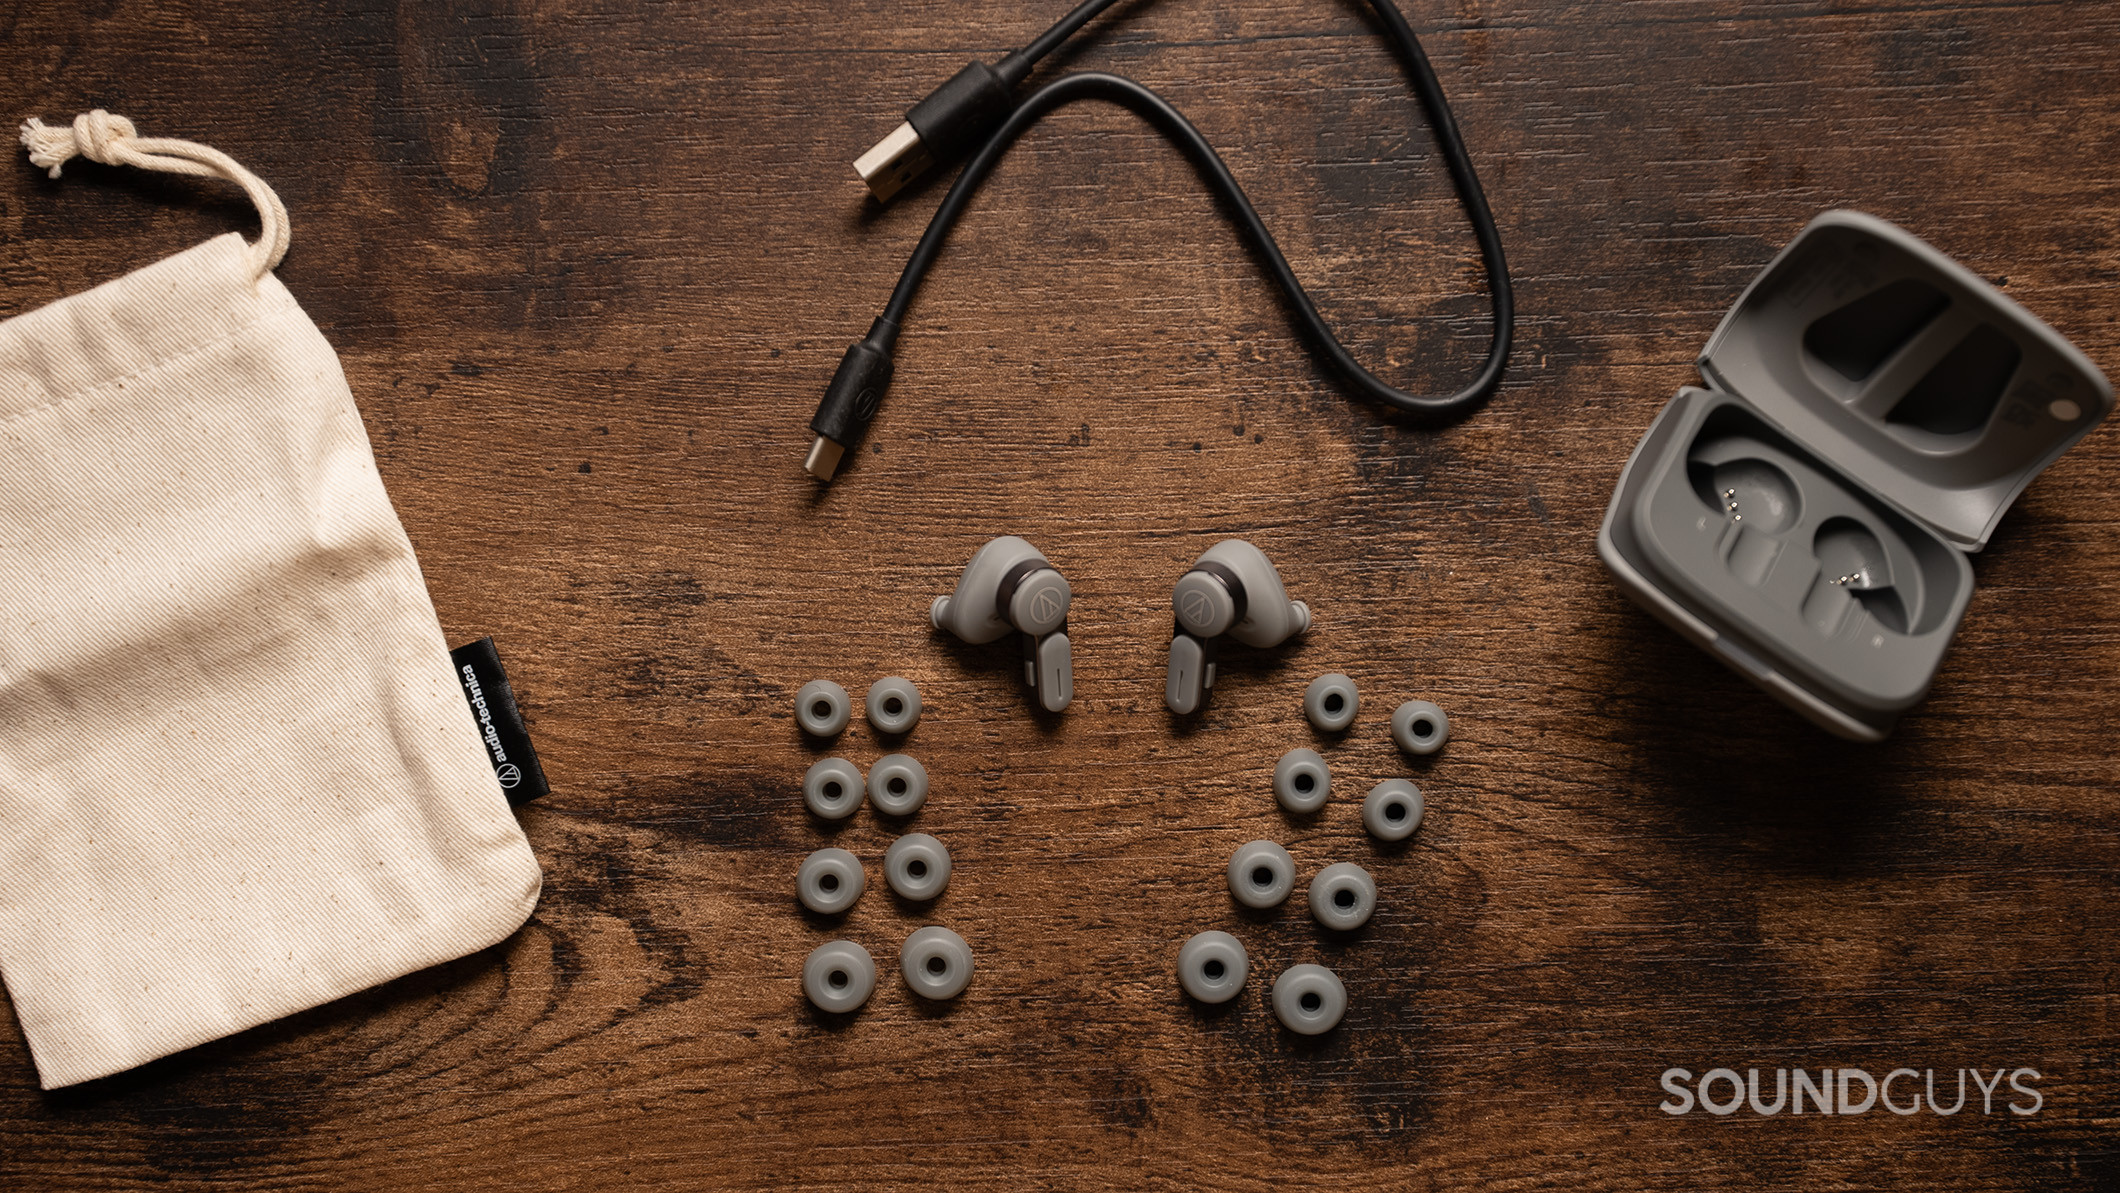 The Audio-Technica ATH-TWX7 earbuds alongside the included ear tips, cloth carrying case, and USB-C charging cable. 